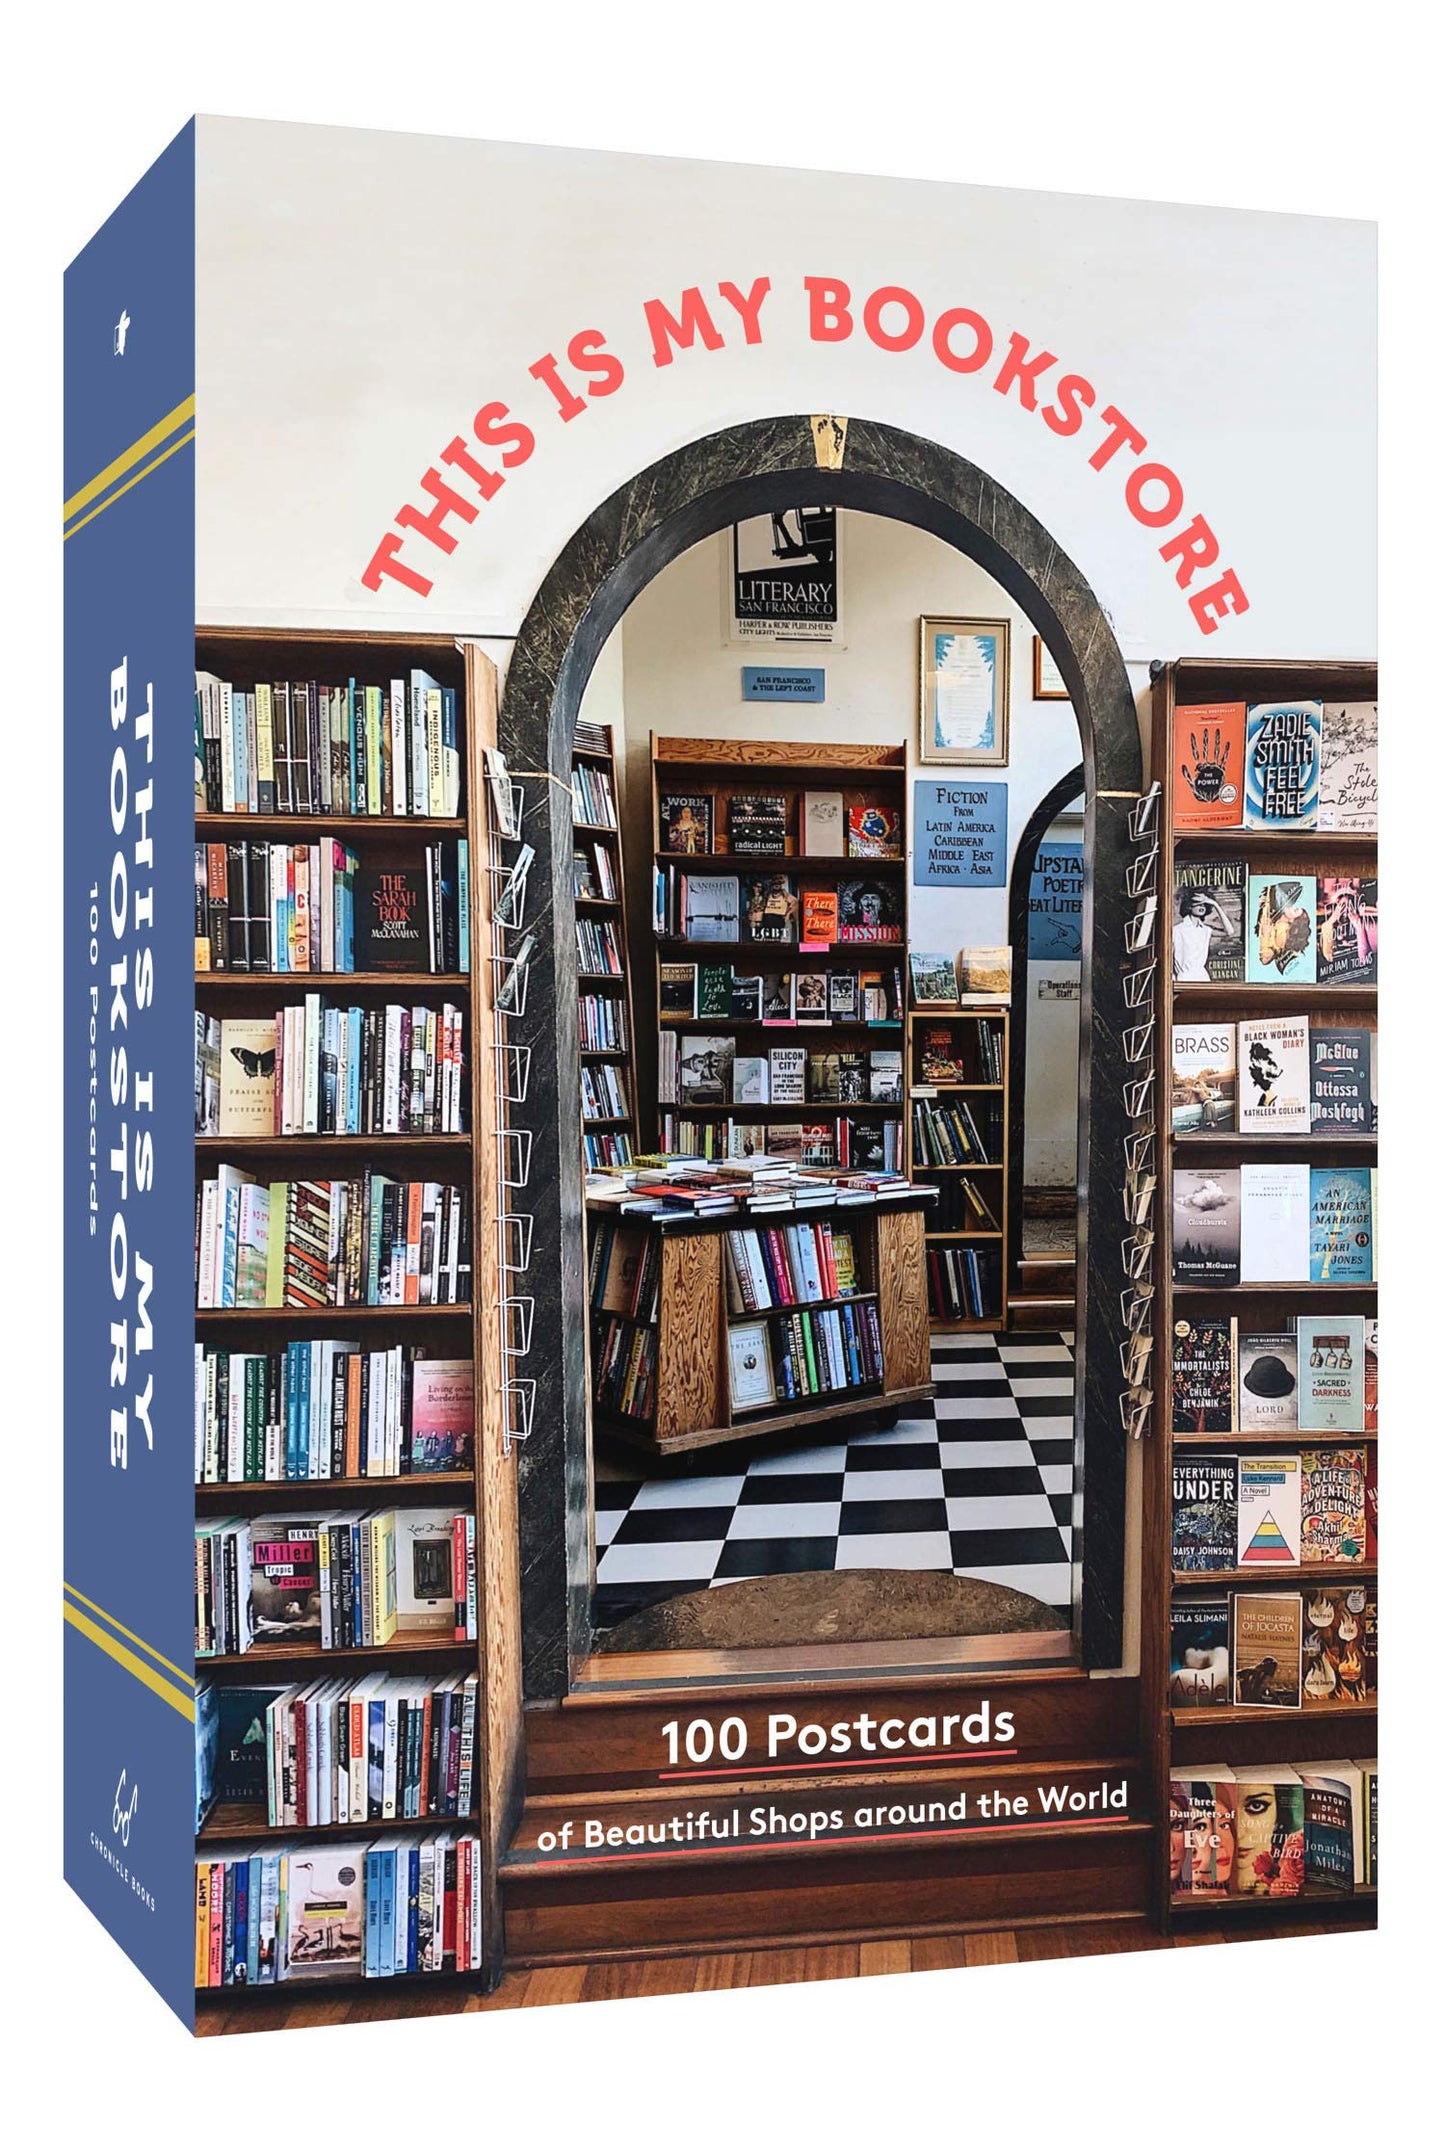 This Is My Bookstore: 100 Postcards of Beautiful Shops Around the World